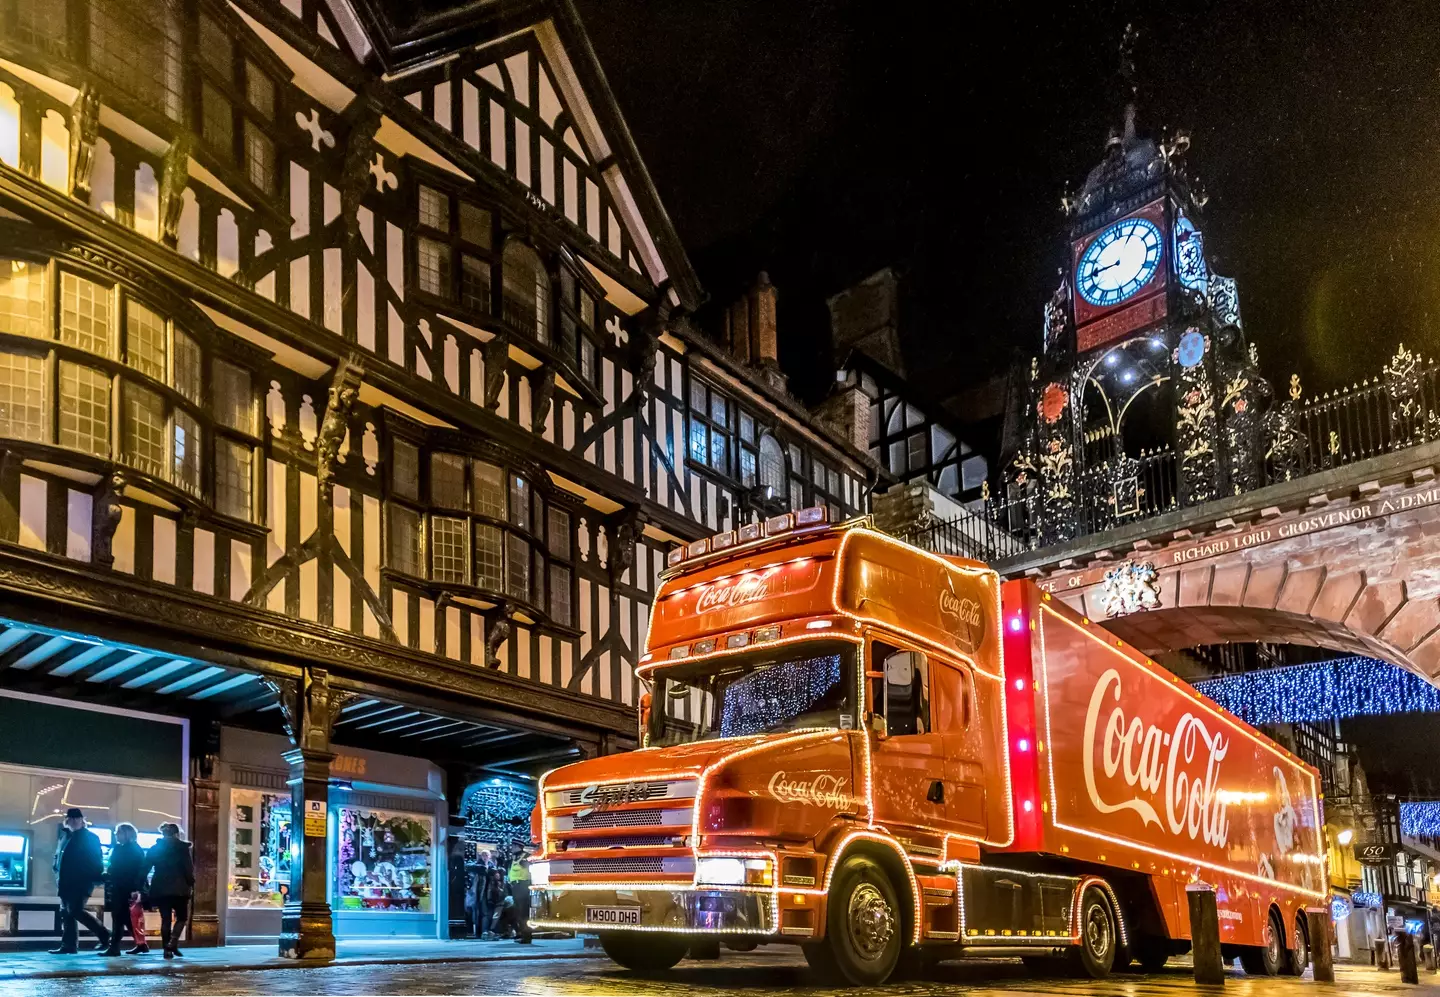 Coca-Cola has partnered with FareShare for the 2022 tour.